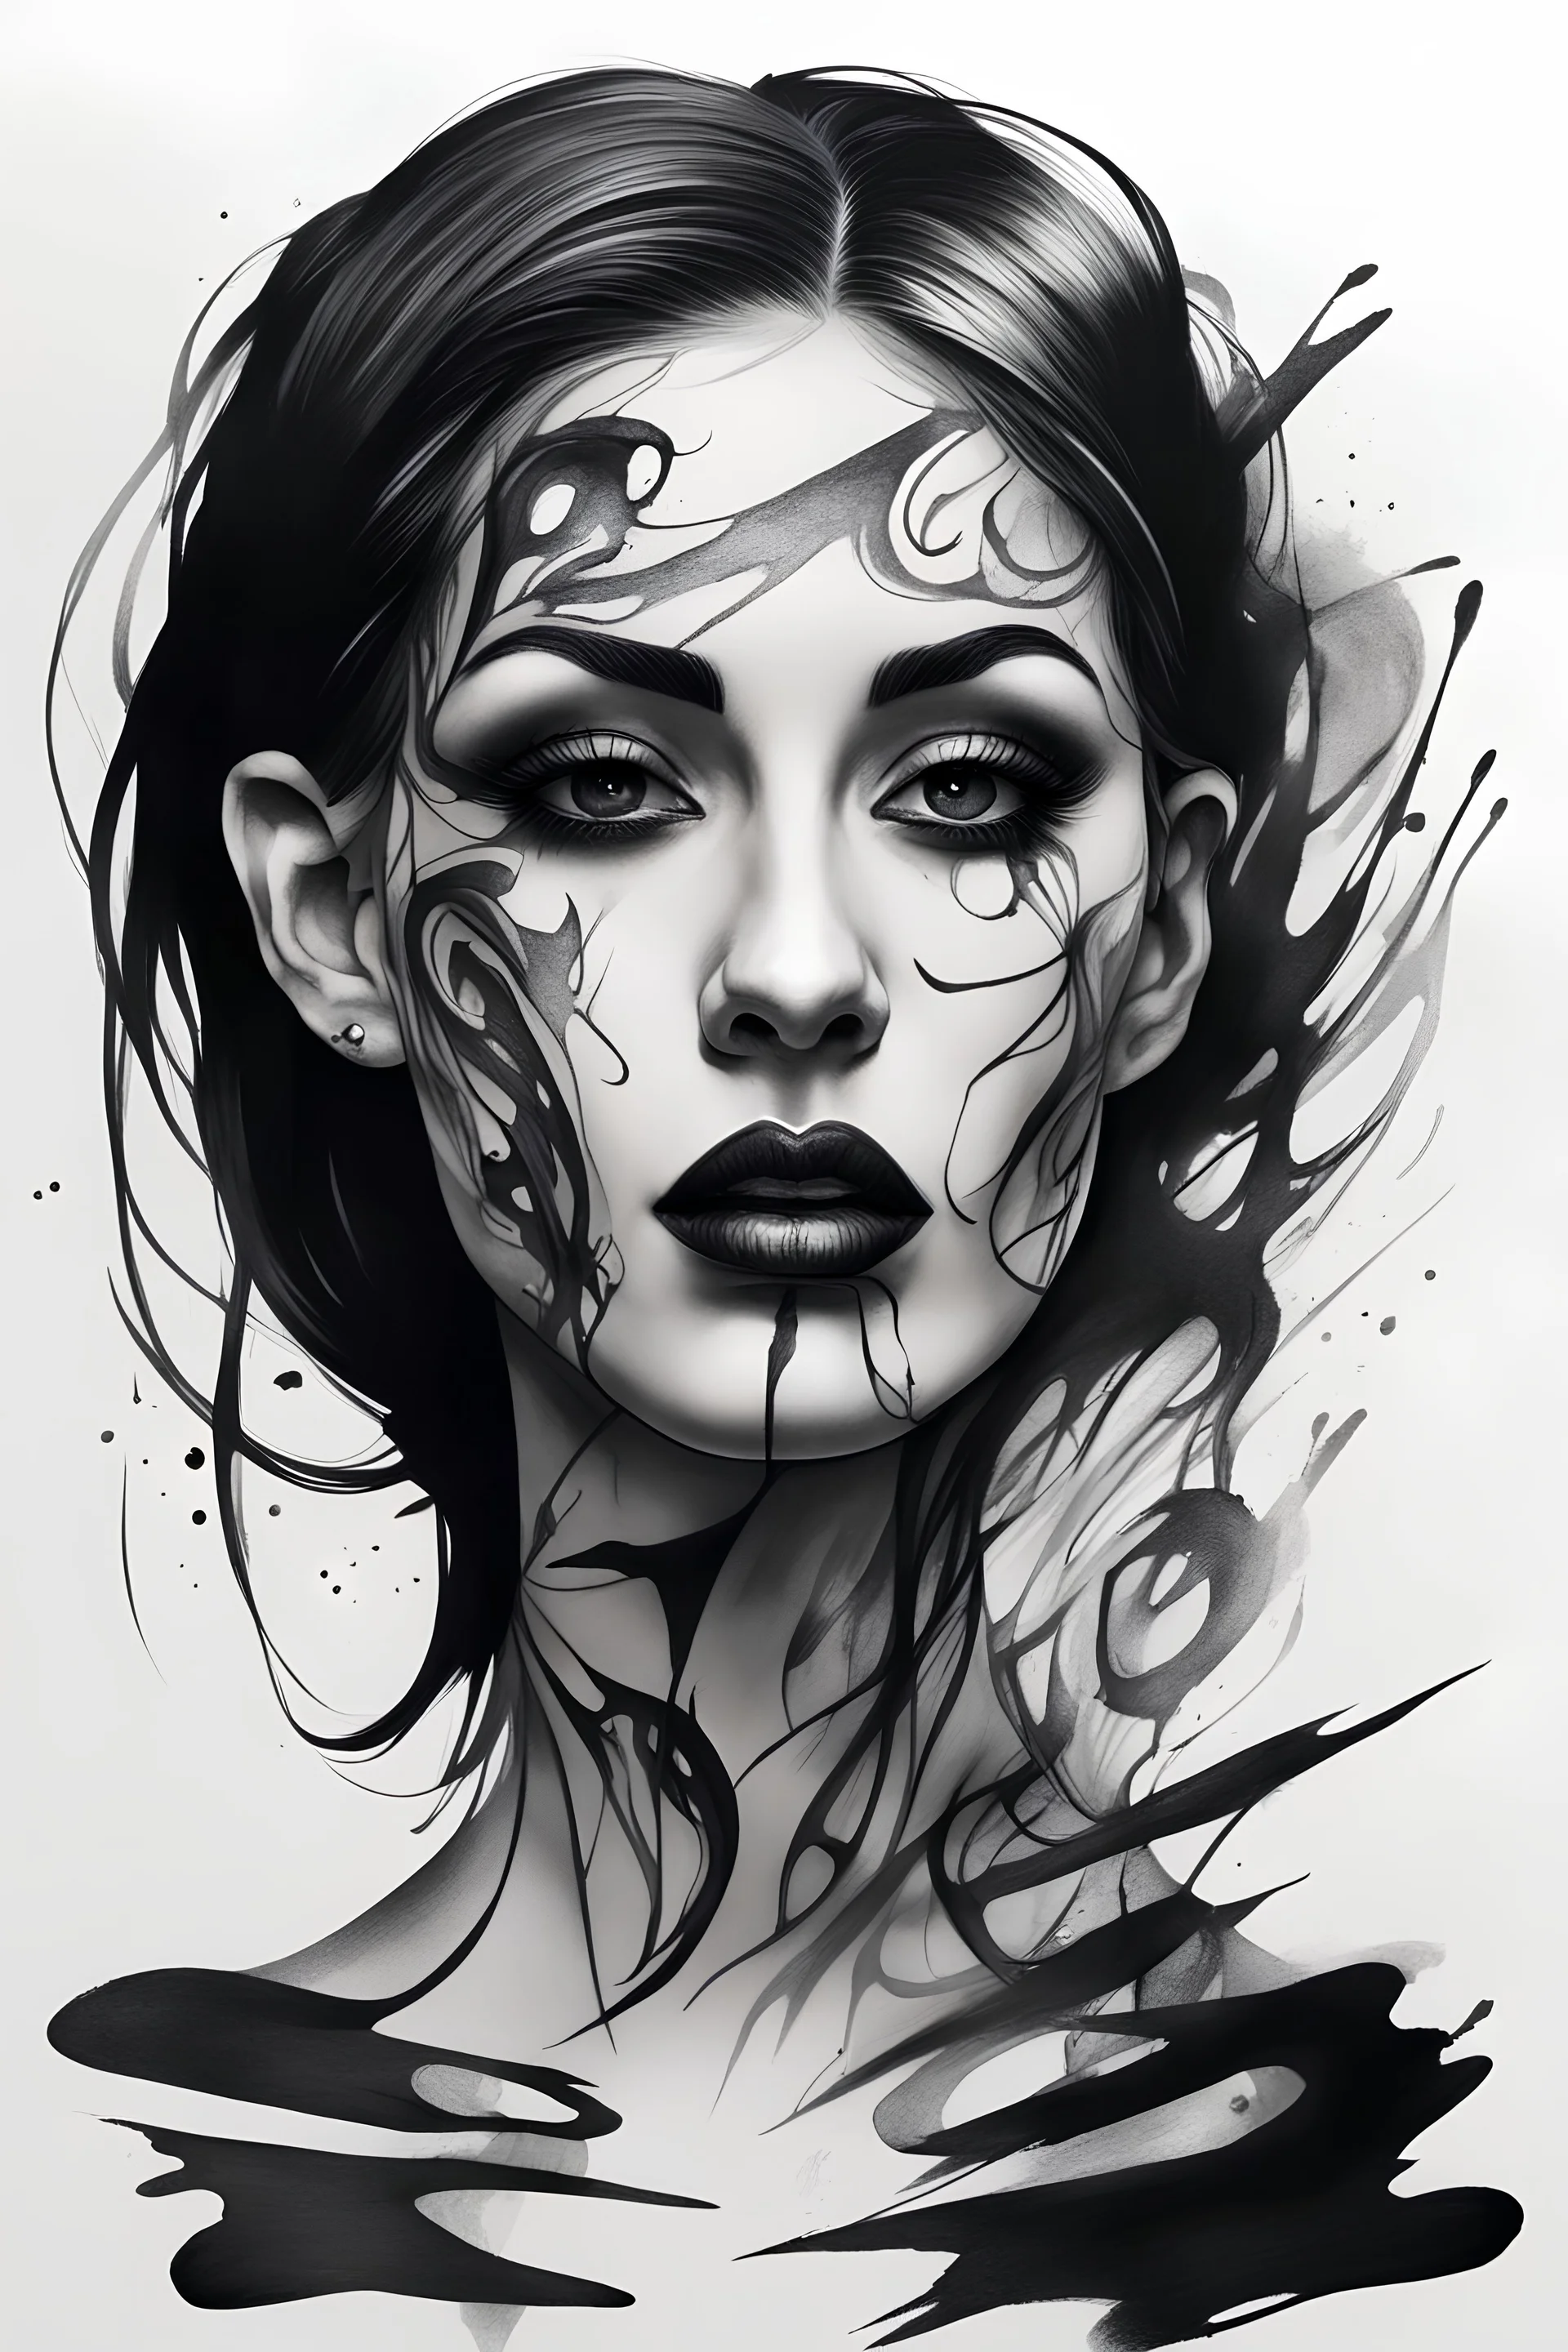 A realistic drawing in negative space black ink on white background of a beautiful goth women with abstract brushstrokes face tattoos to enhance her face